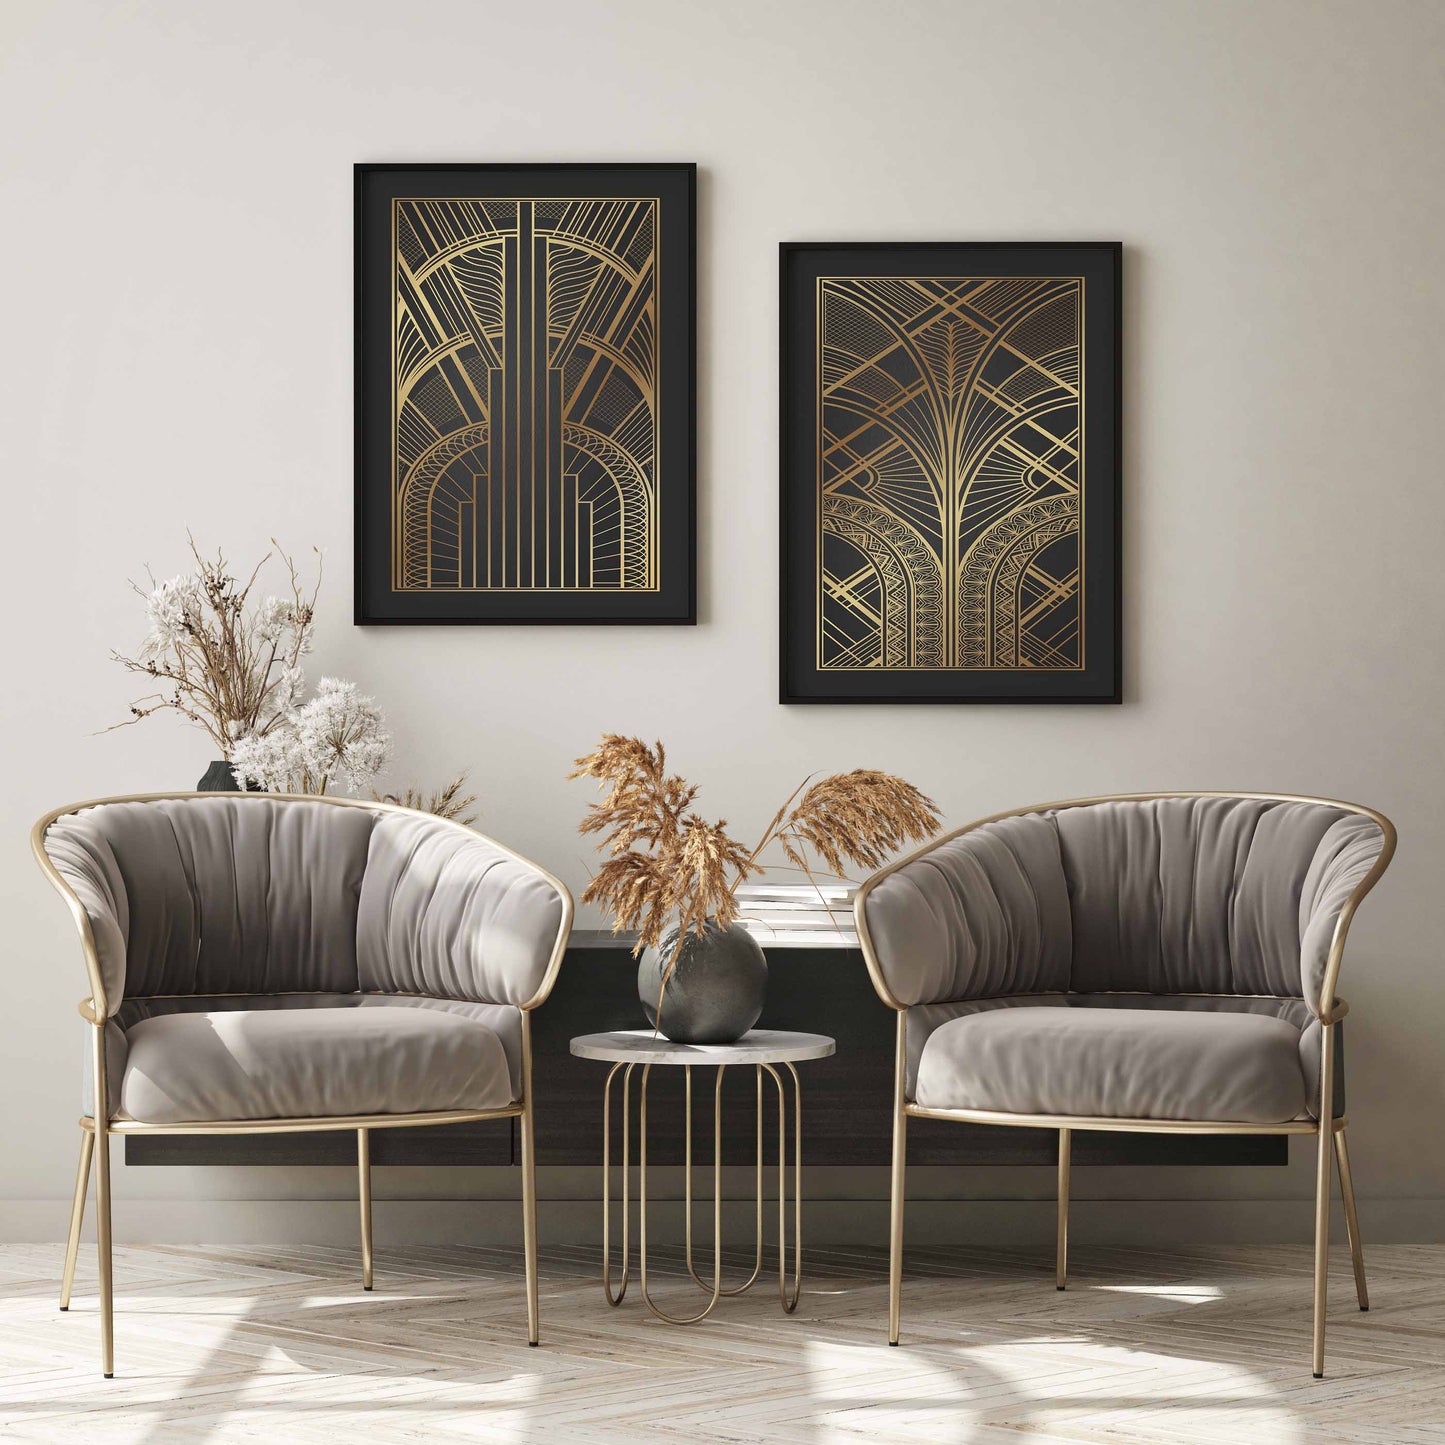 Art deco prints in black and gold